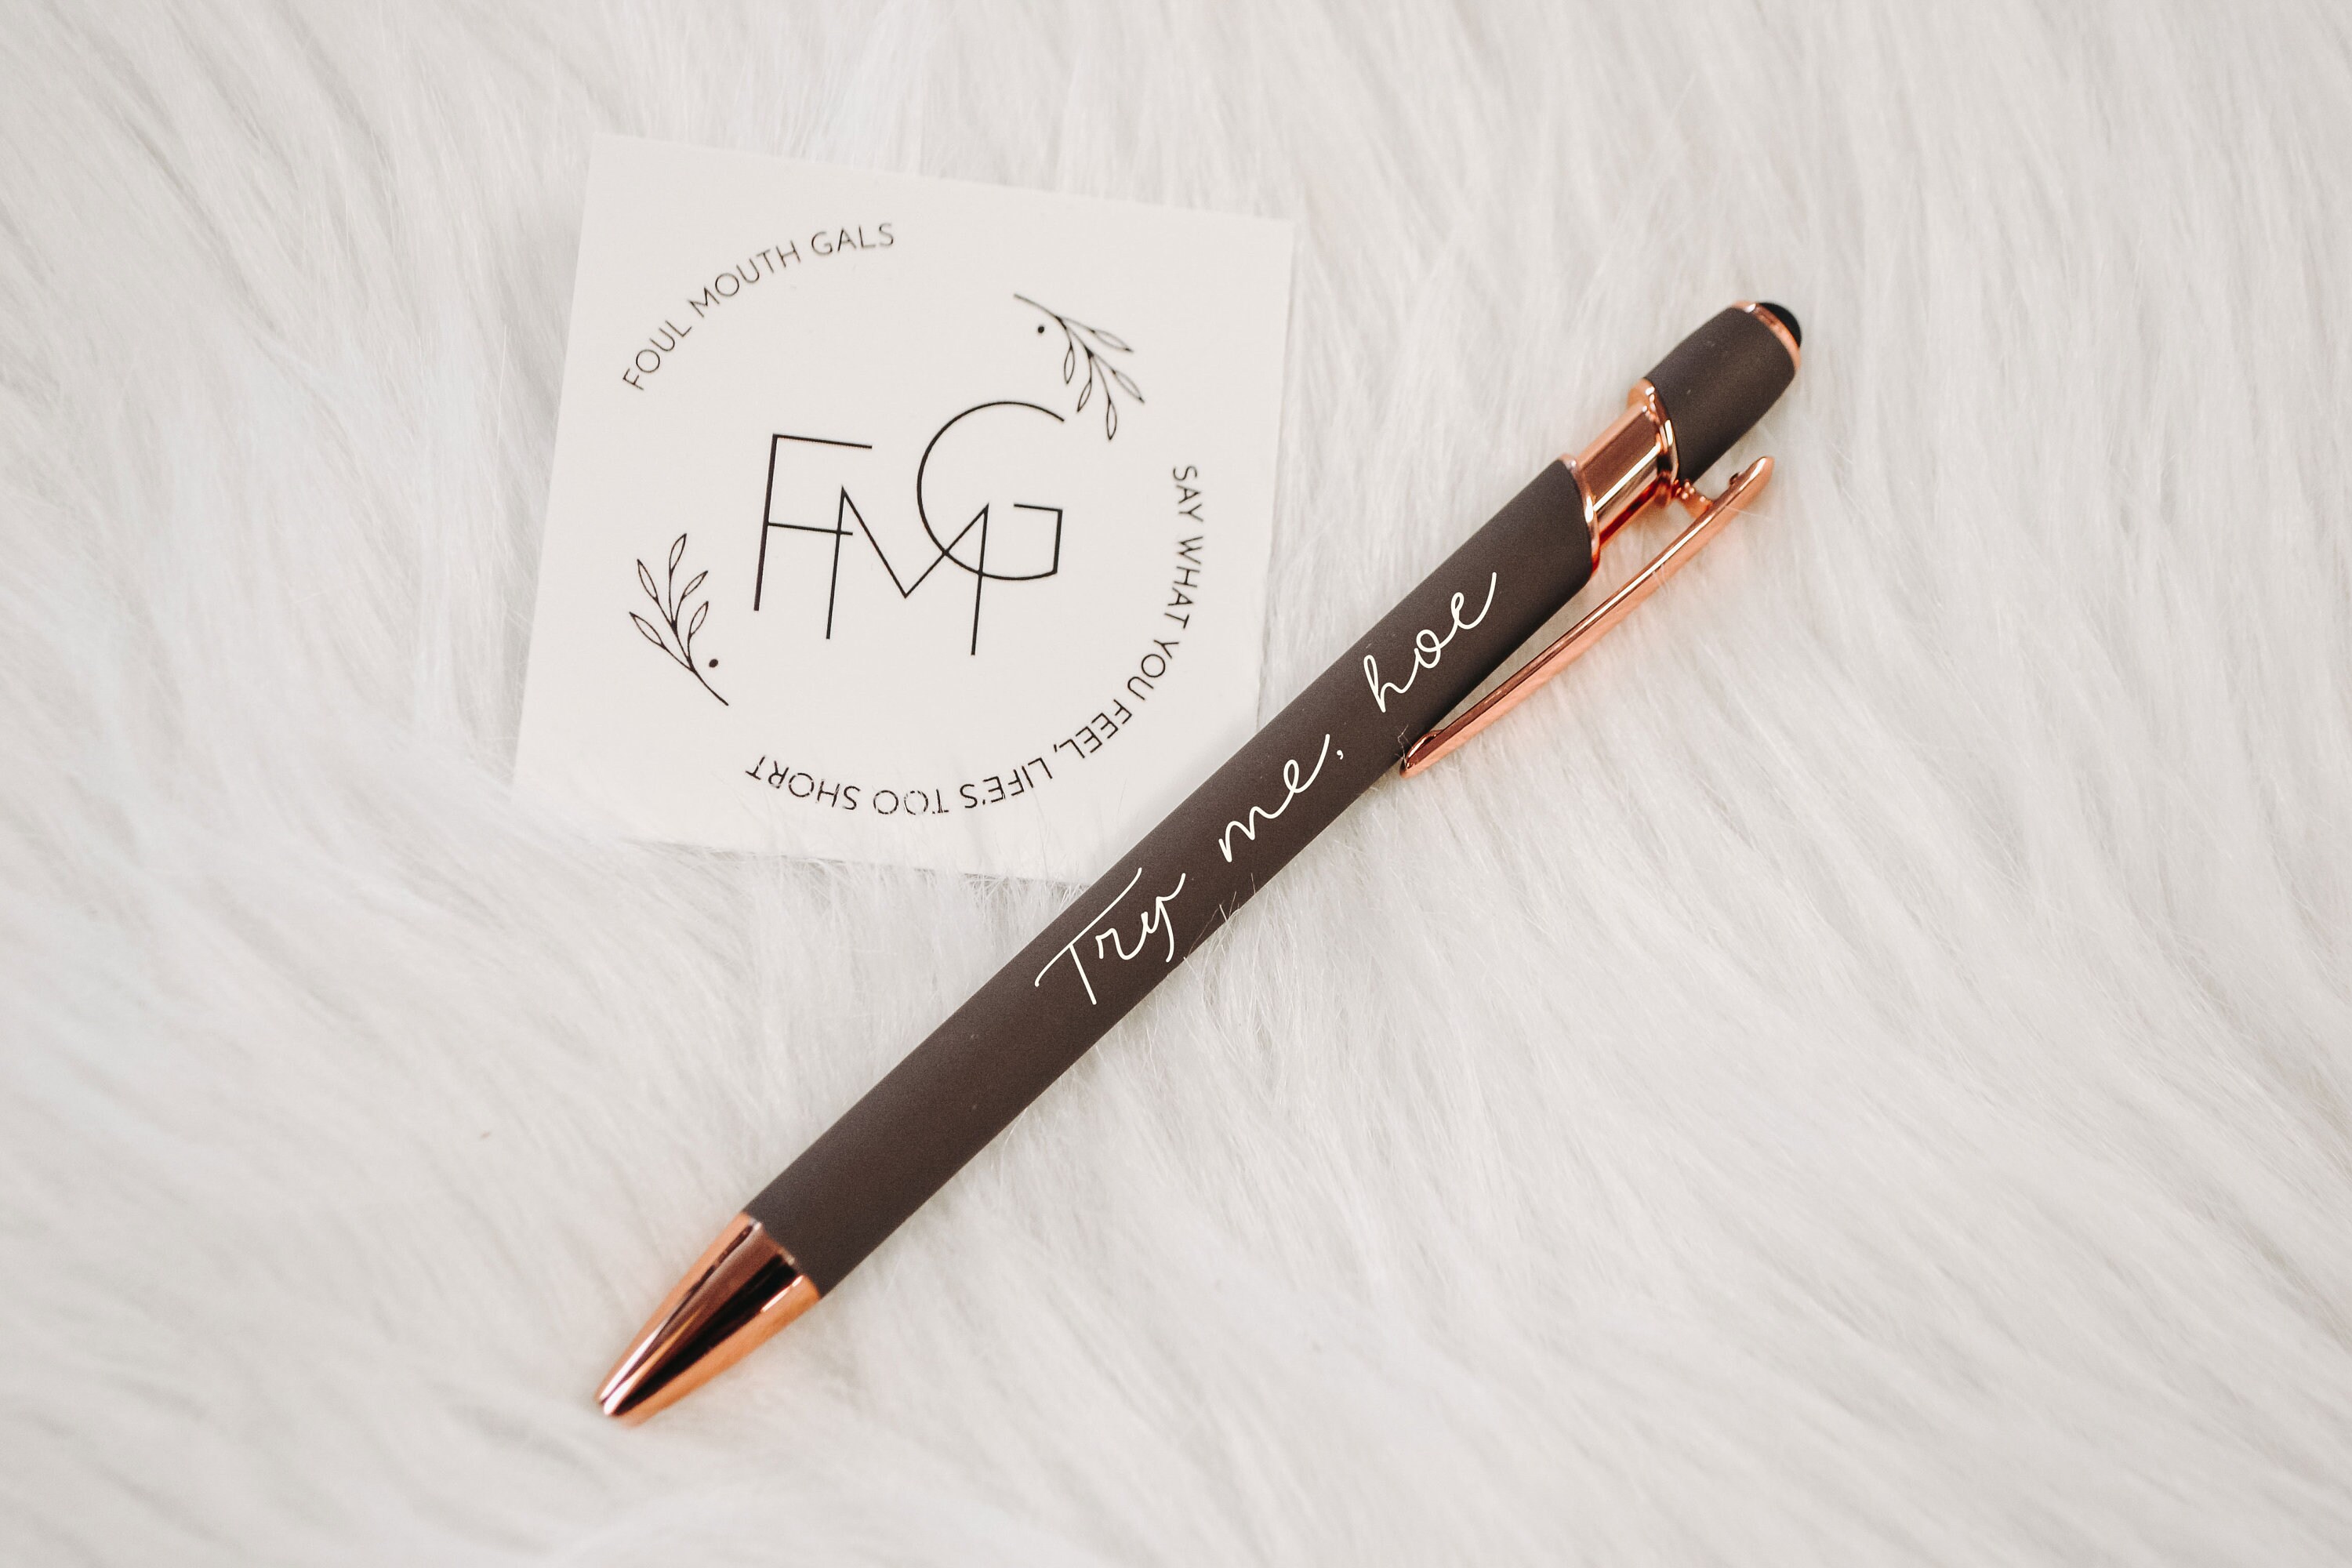 Try Me Hoe, Pens With Sayings, Funny Gifts for Best Friend, Funny